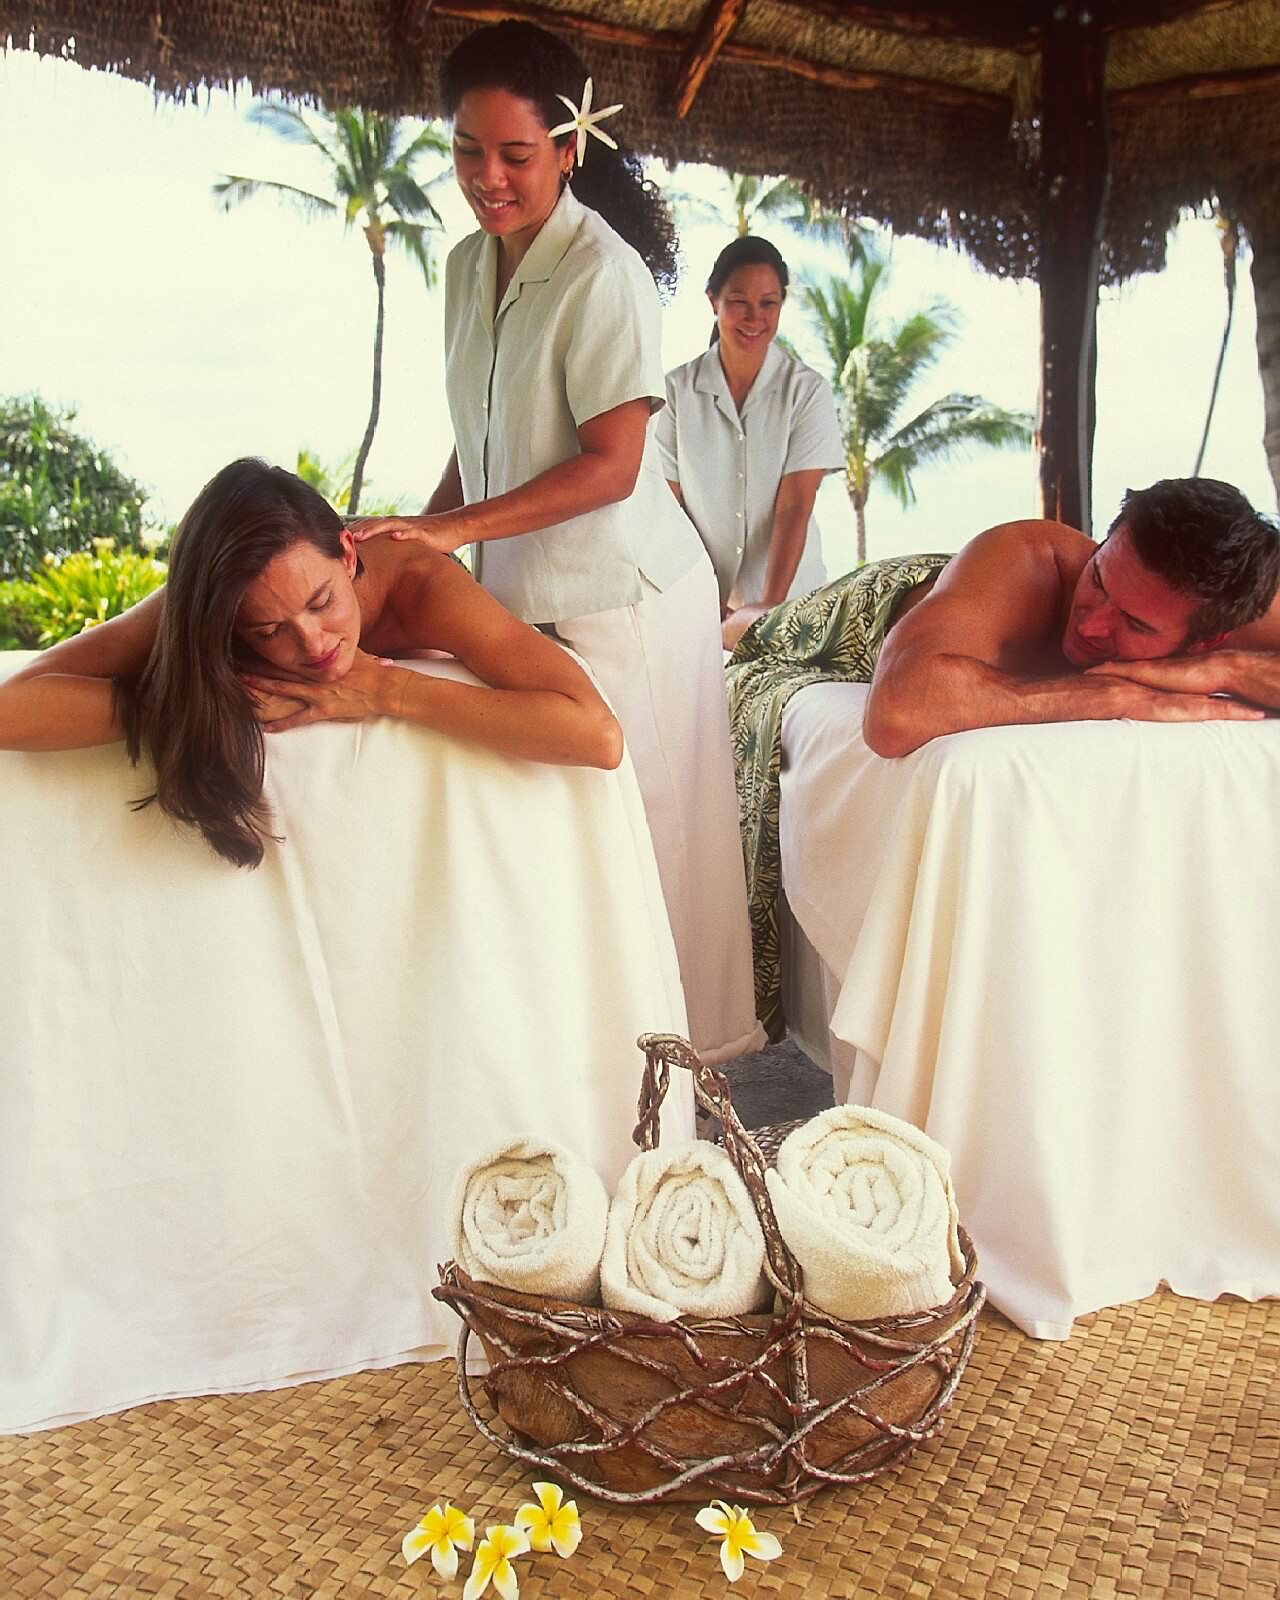 #DreamingofFSMaui - Your Own Private Paradise includes a private beachside couples massage in an authentic Hawaiian hale.